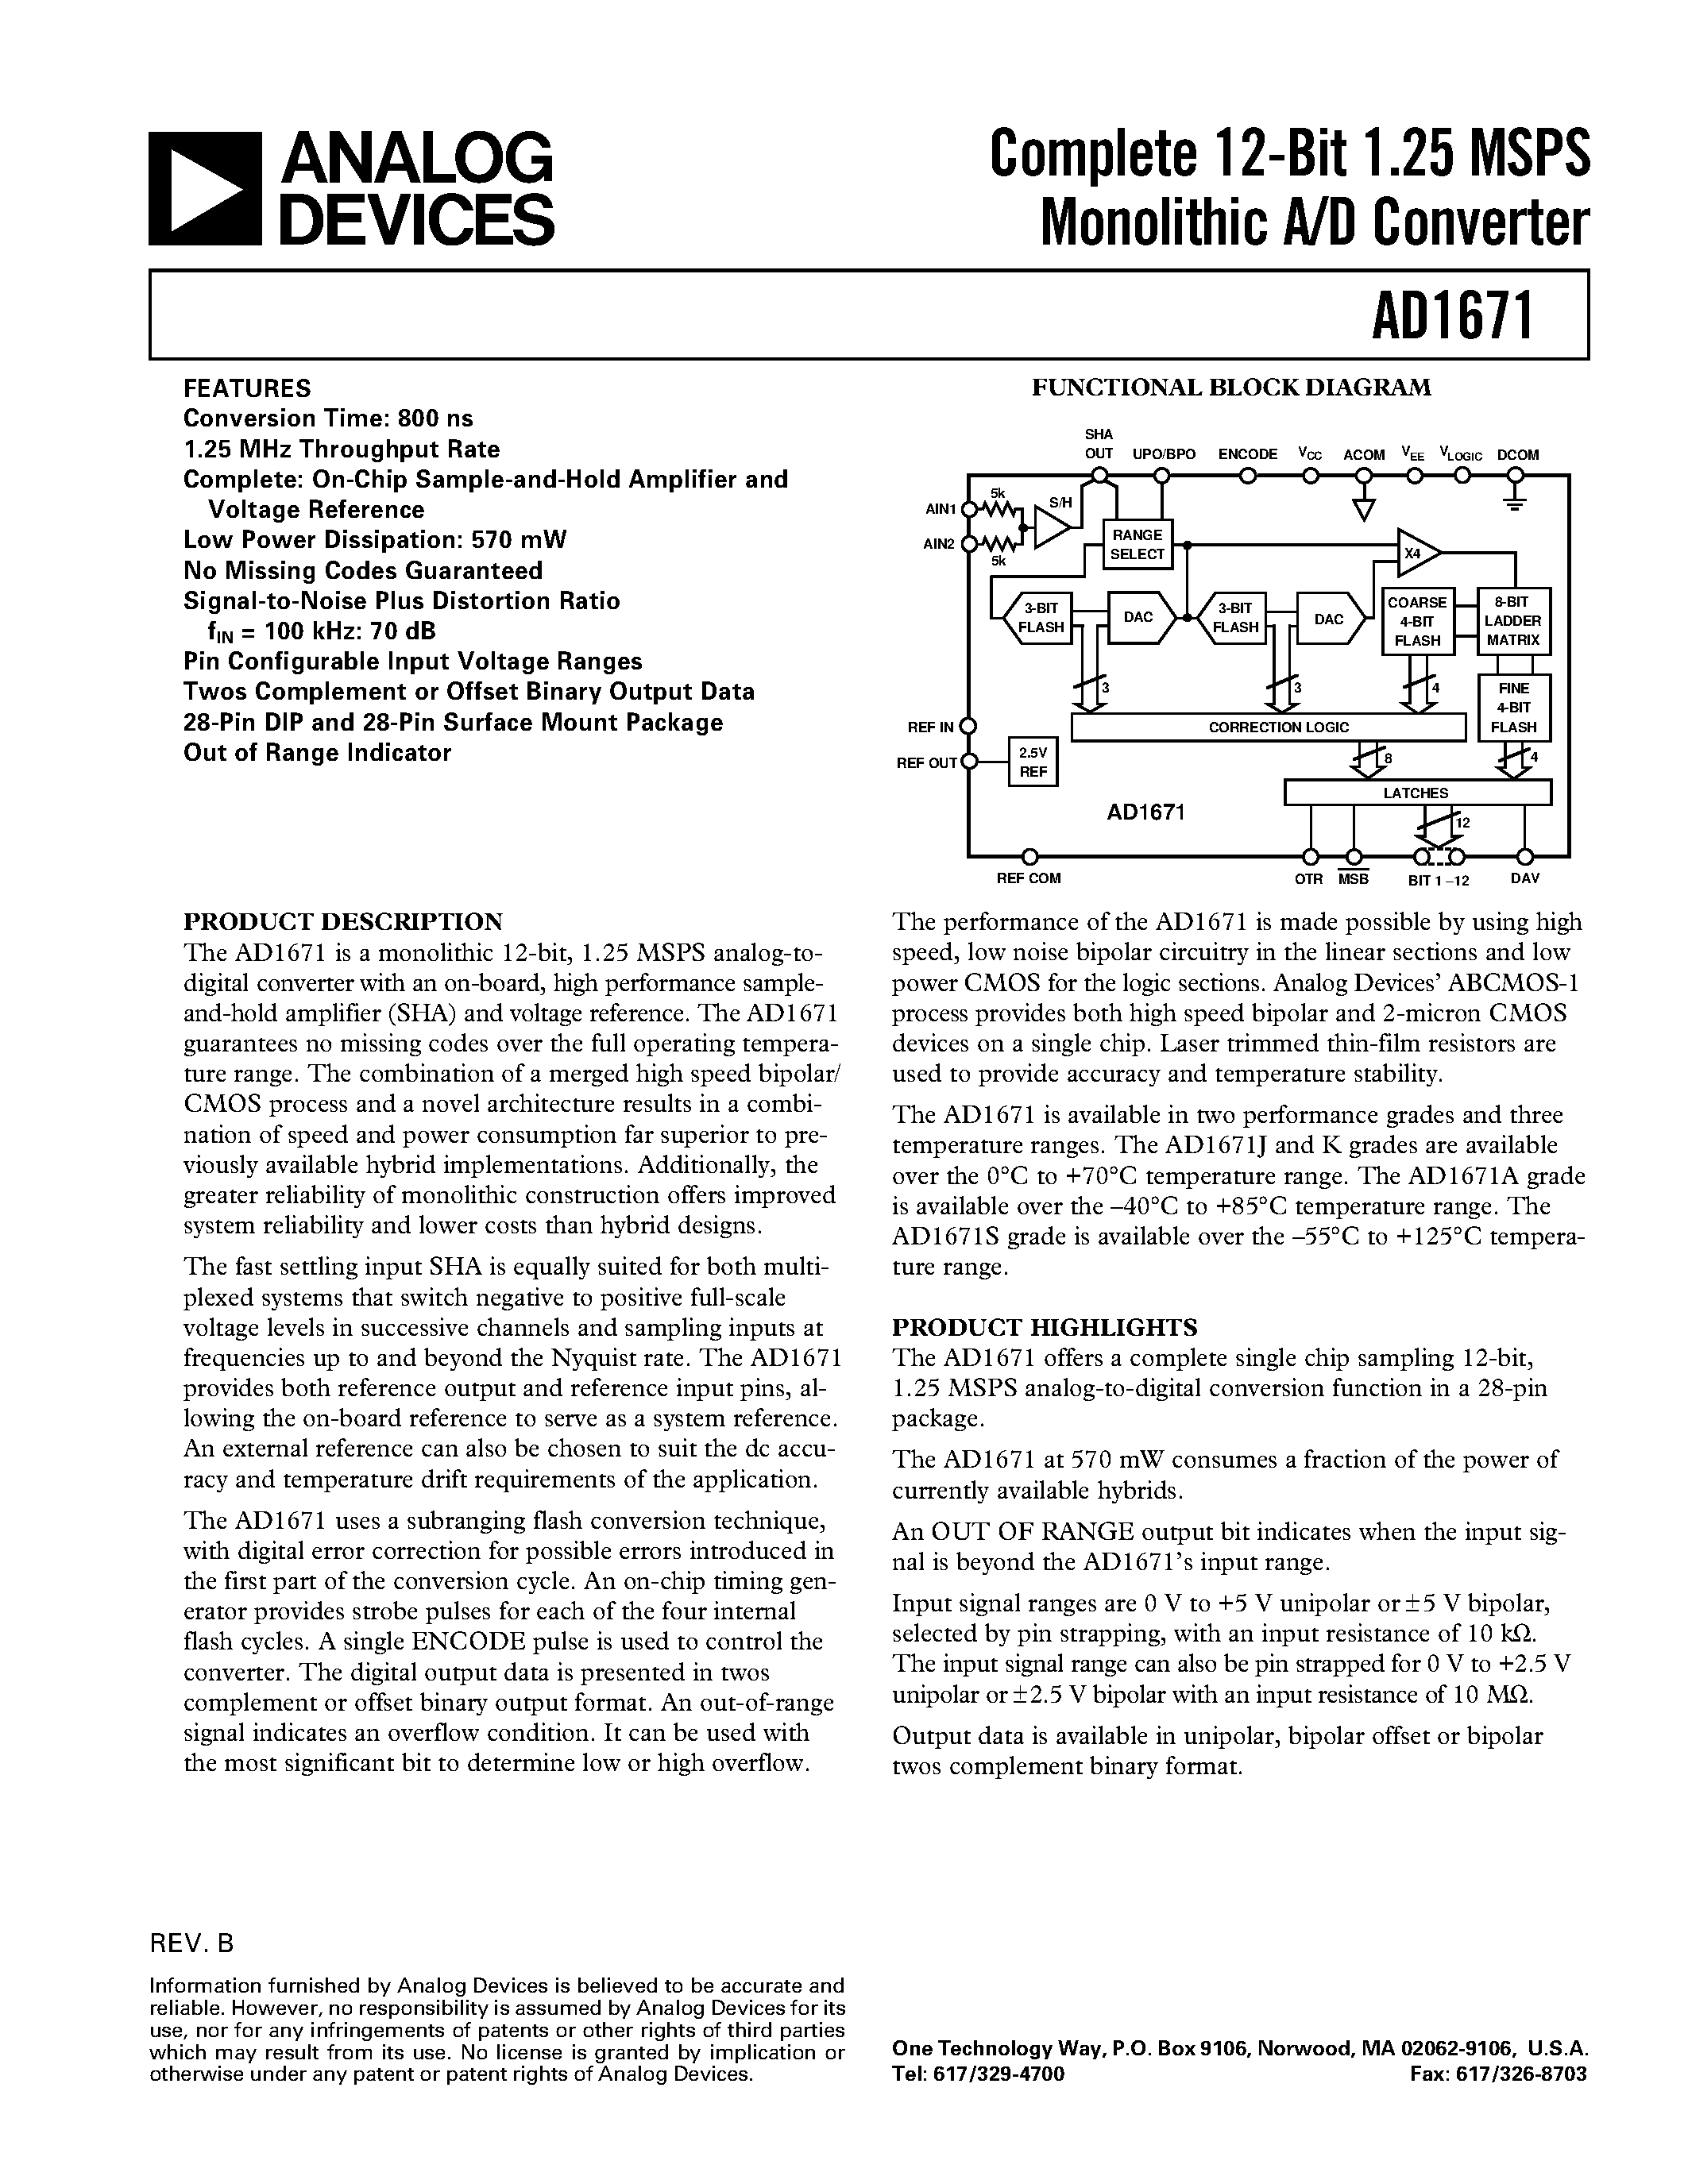 Datasheet AD1671S - Complete 12-Bit 1.25 MSPS Monolithic A/D Converter page 1